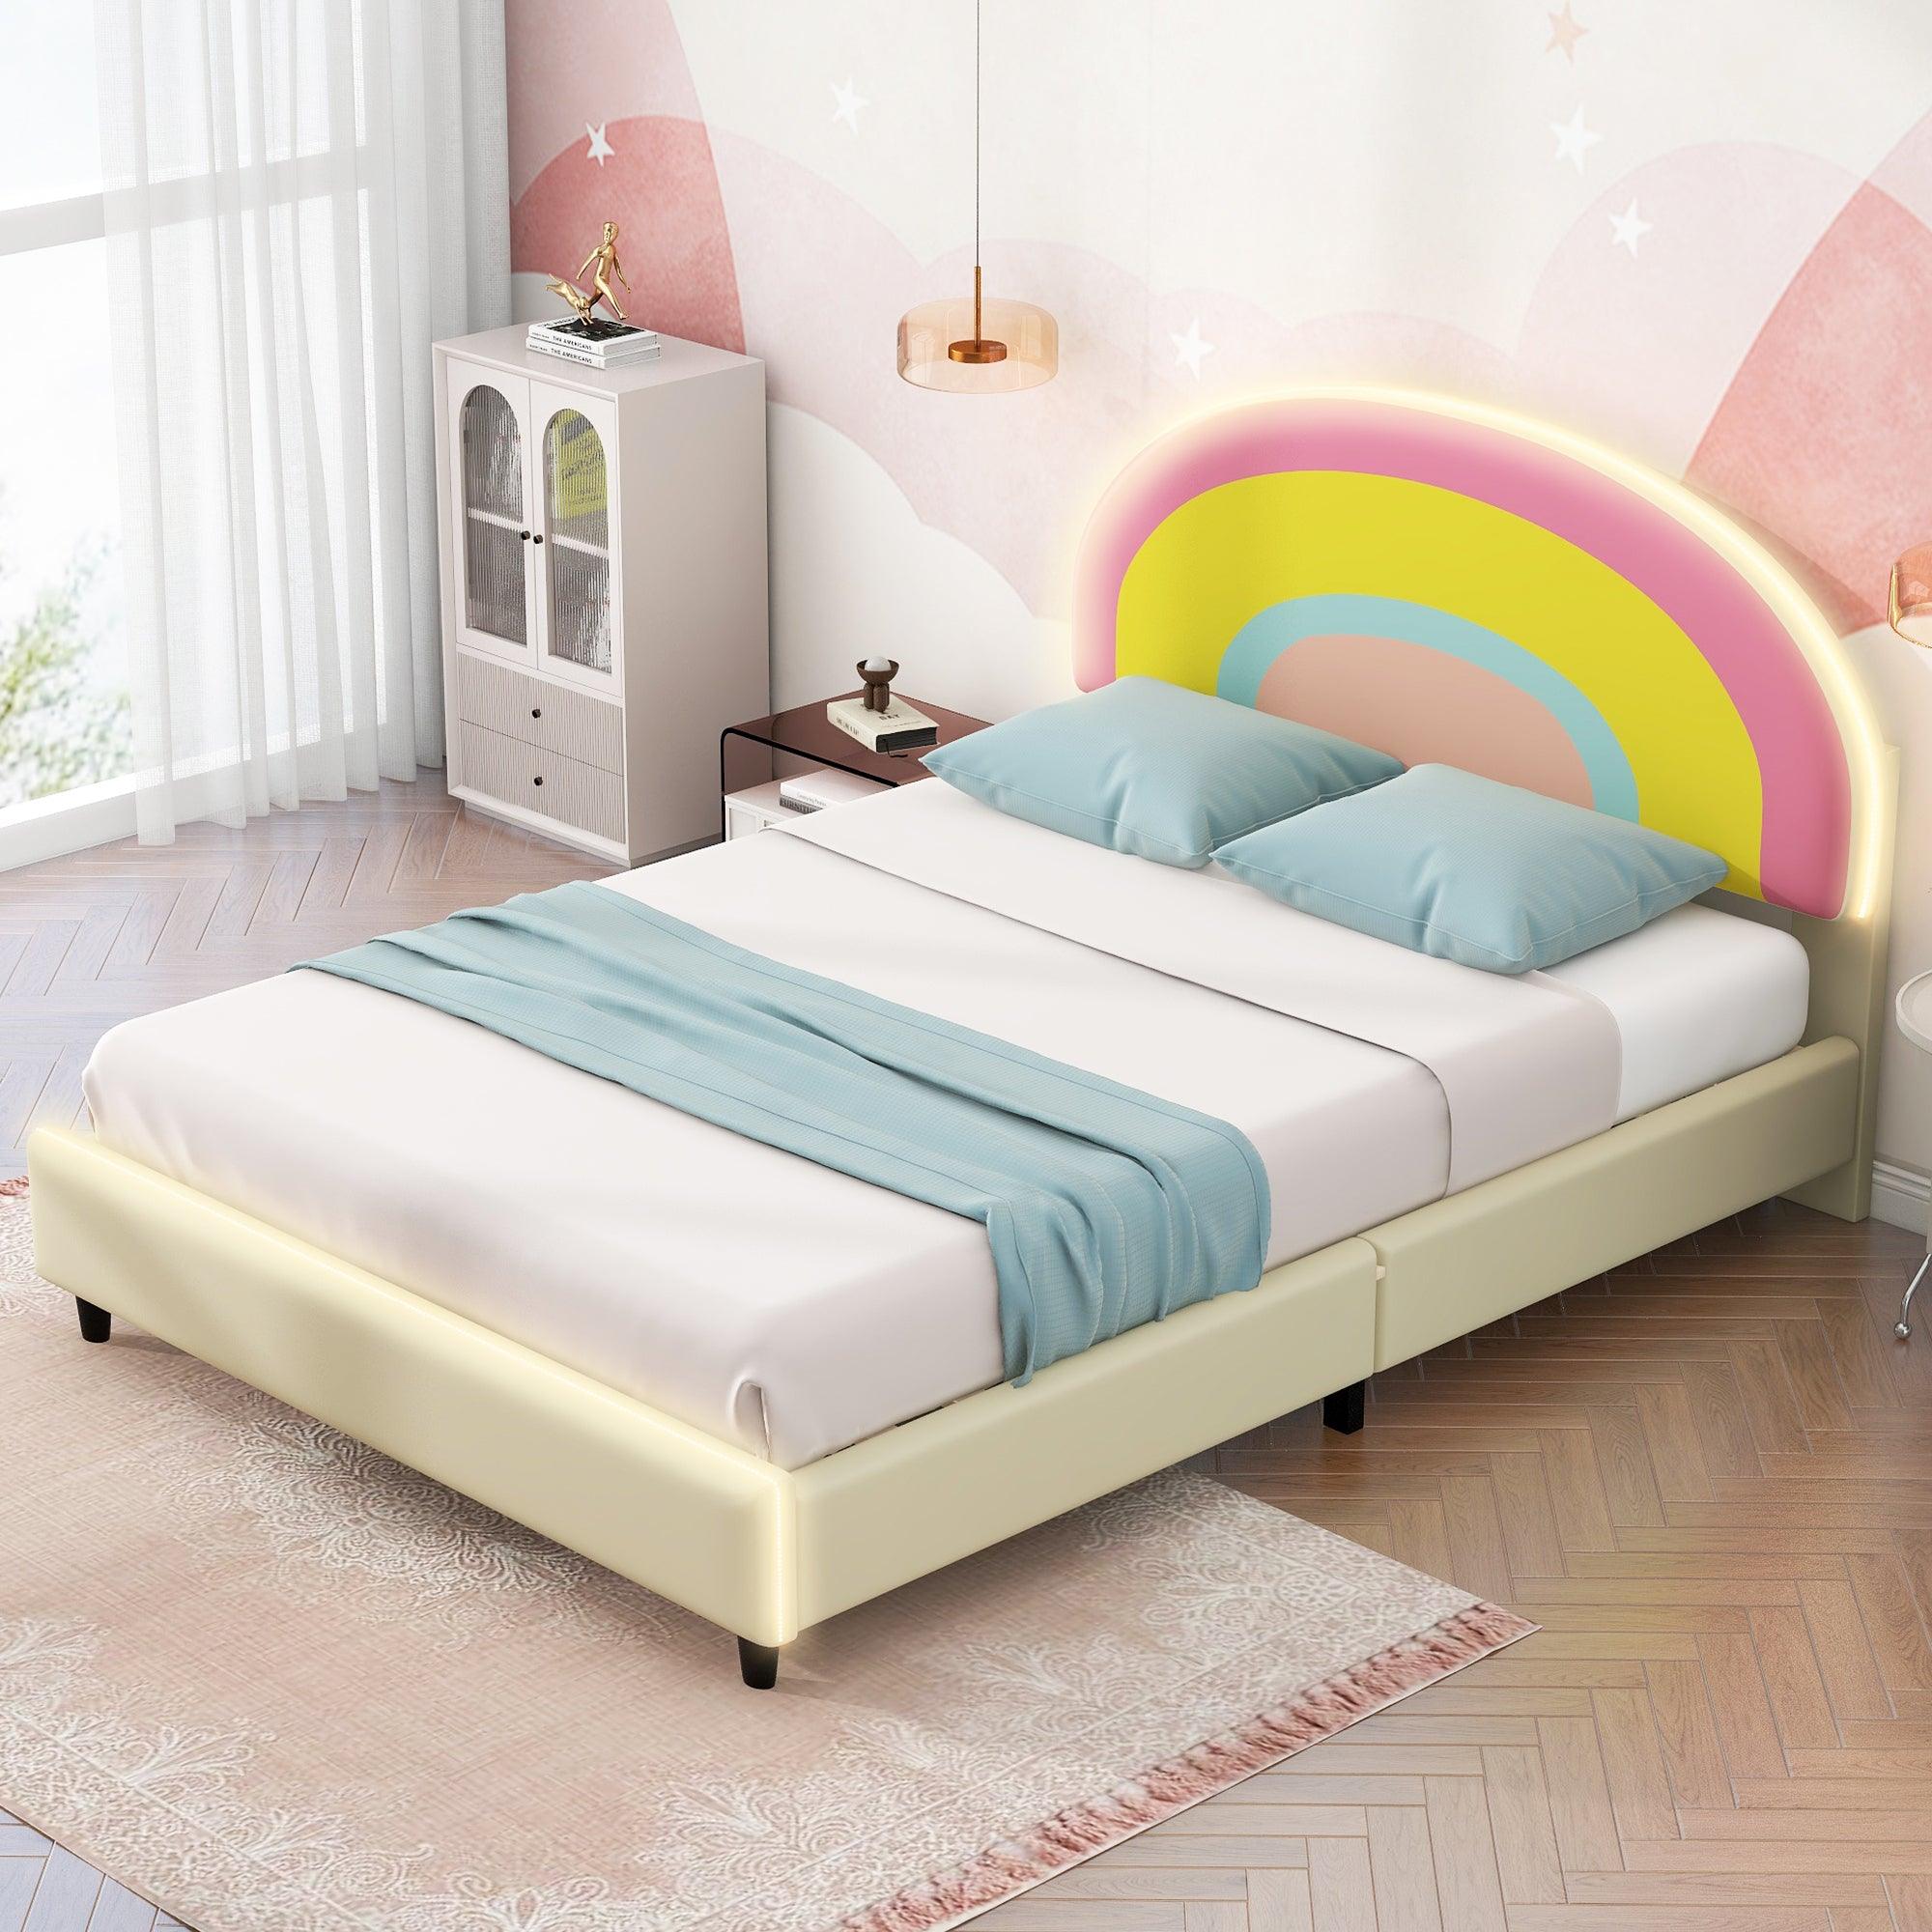 🆓🚛 Twin Size Upholstered Platform Bed With Rainbow Shaped & Height-Adjustbale Headboard, Led Light Strips, Beige